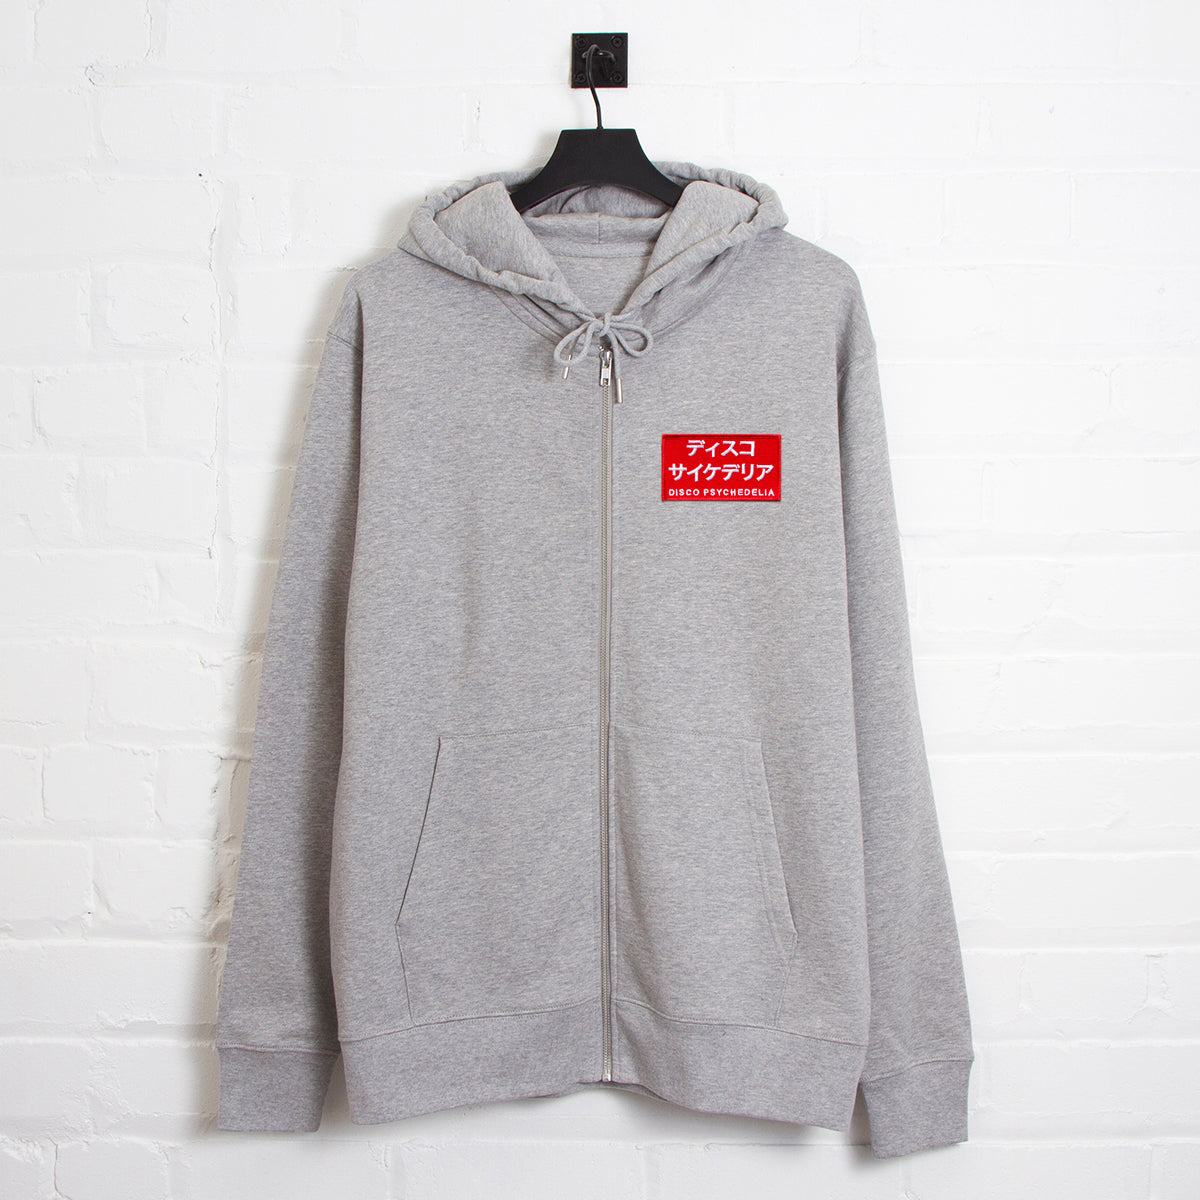 Red Disco Psychedelia Crest - Zipped Hood - Grey